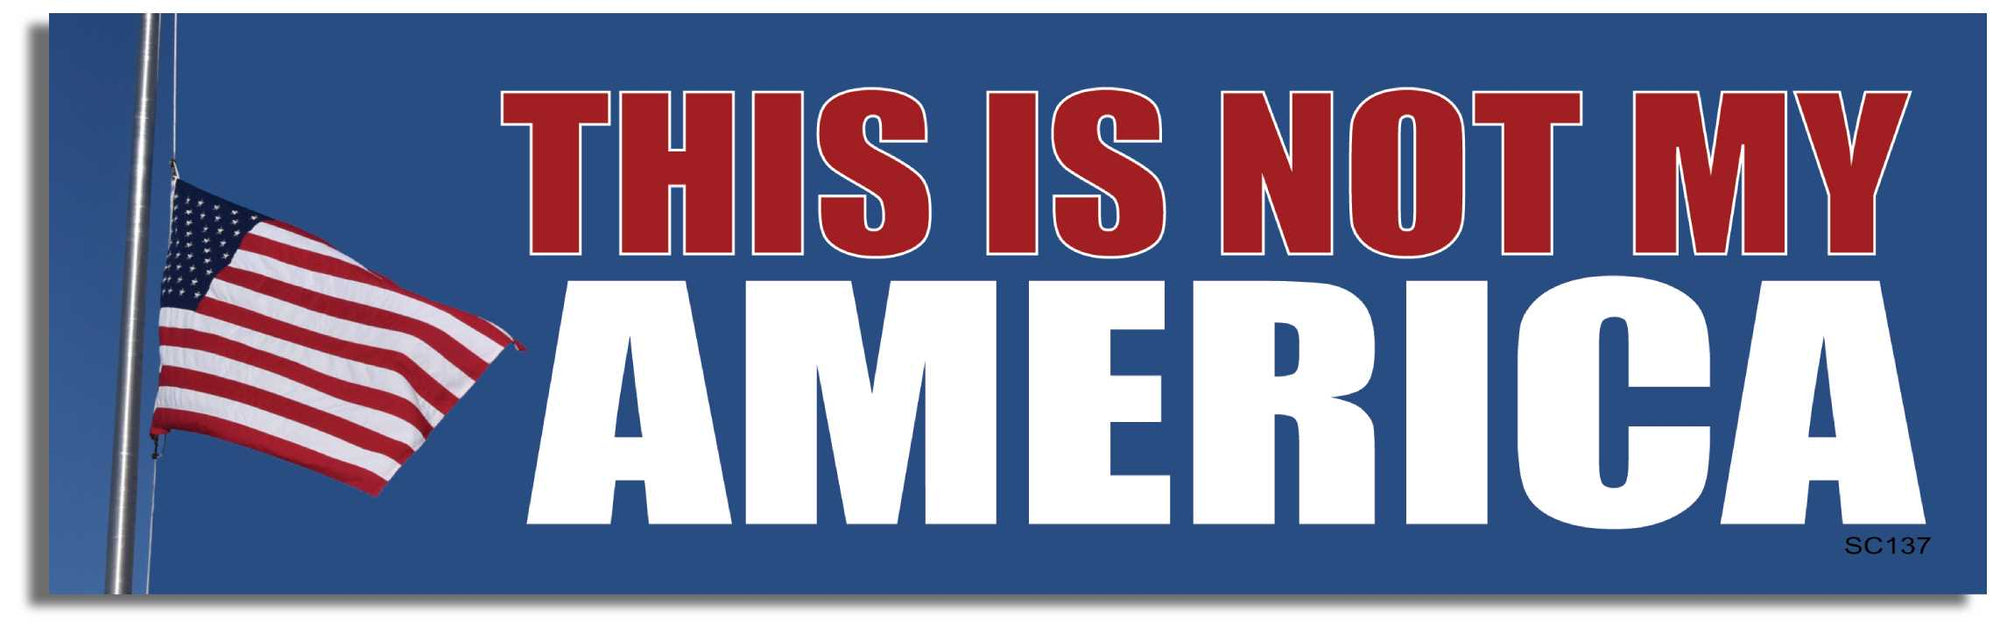 This is not my America-  3" x 10" Bumper Sticker--Car Magnet- -  Decal Bumper Sticker-political Bumper Sticker Car Magnet This is not my America-   Decal for carsnew age, yoga